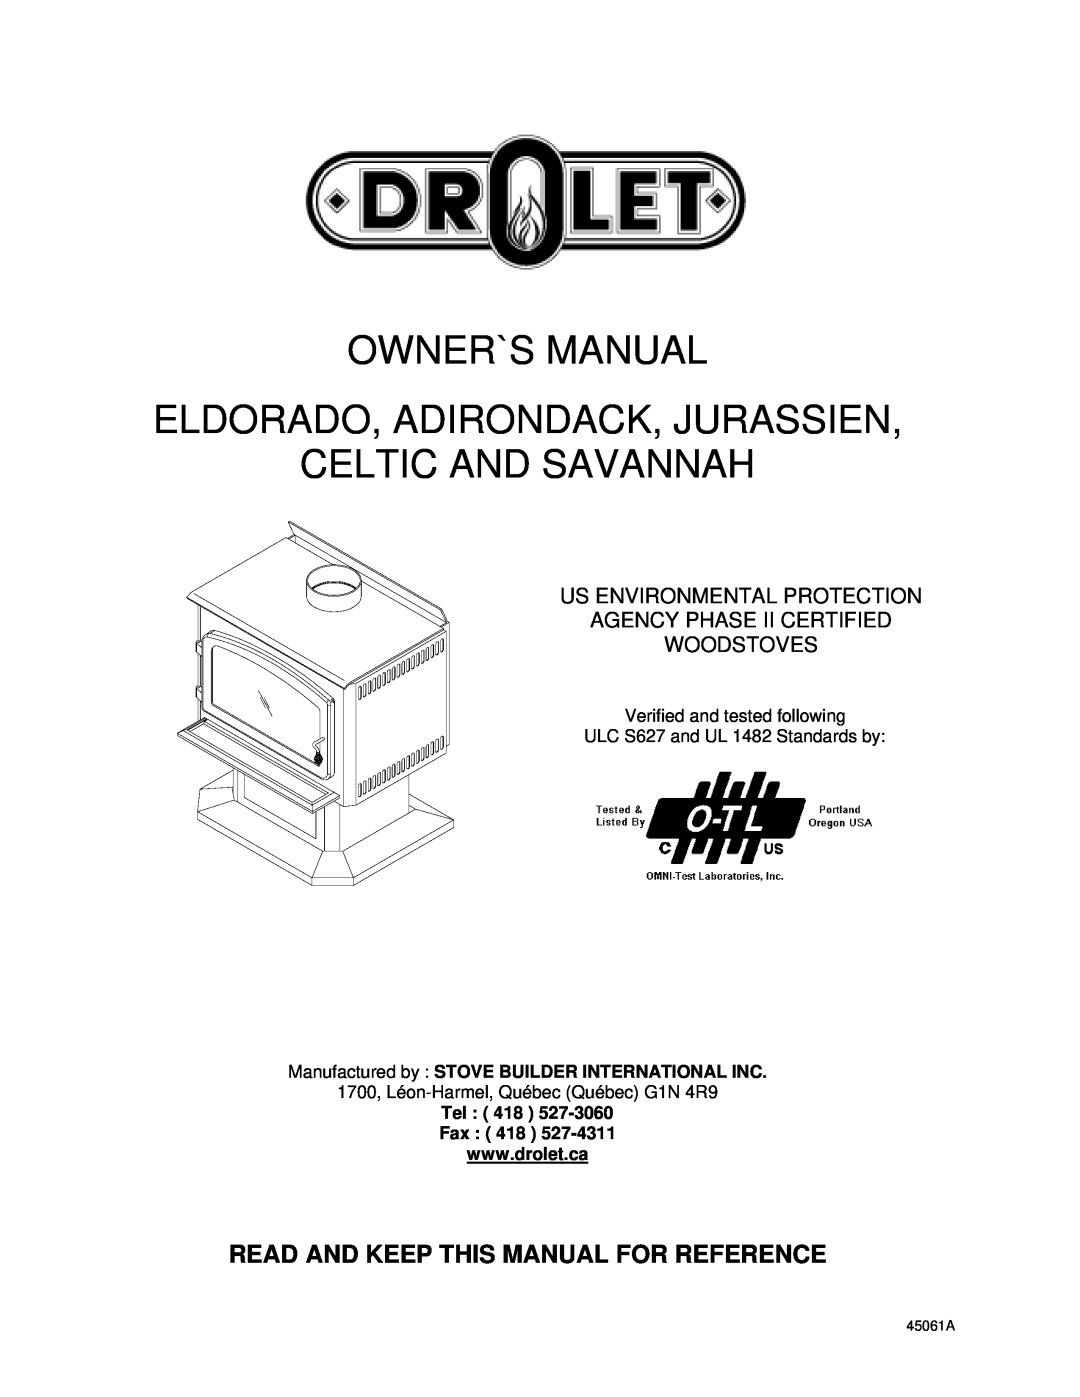 Drolet 58991 owner manual Read And Keep This Manual For Reference, Manufactured by STOVE BUILDER INTERNATIONAL INC, 45061A 